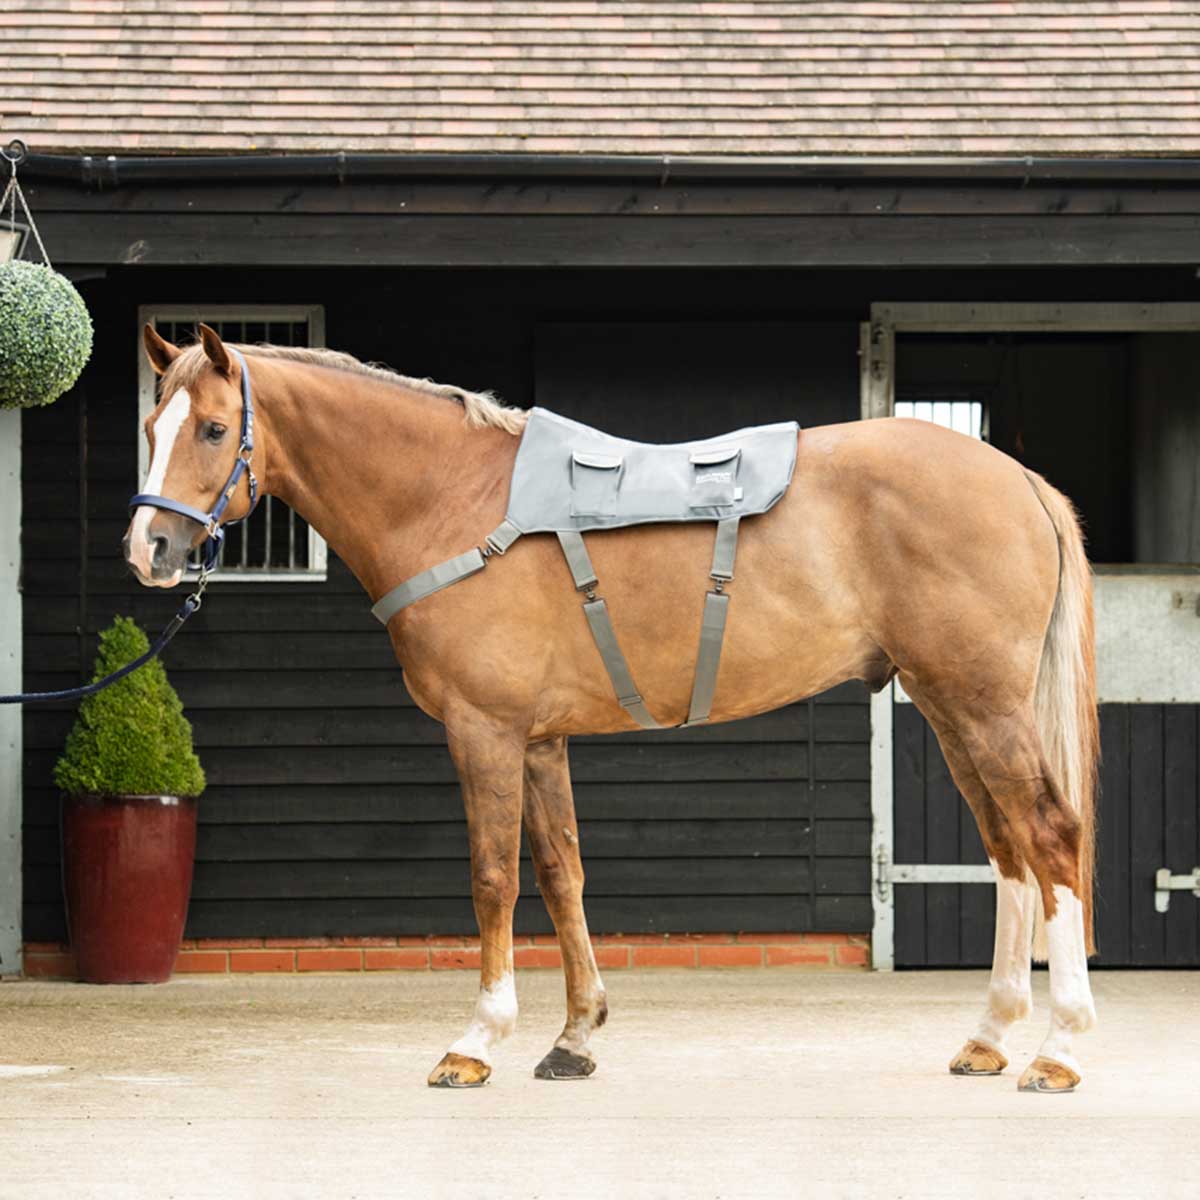 Why the Equilibrium massage products are really good for your horse.